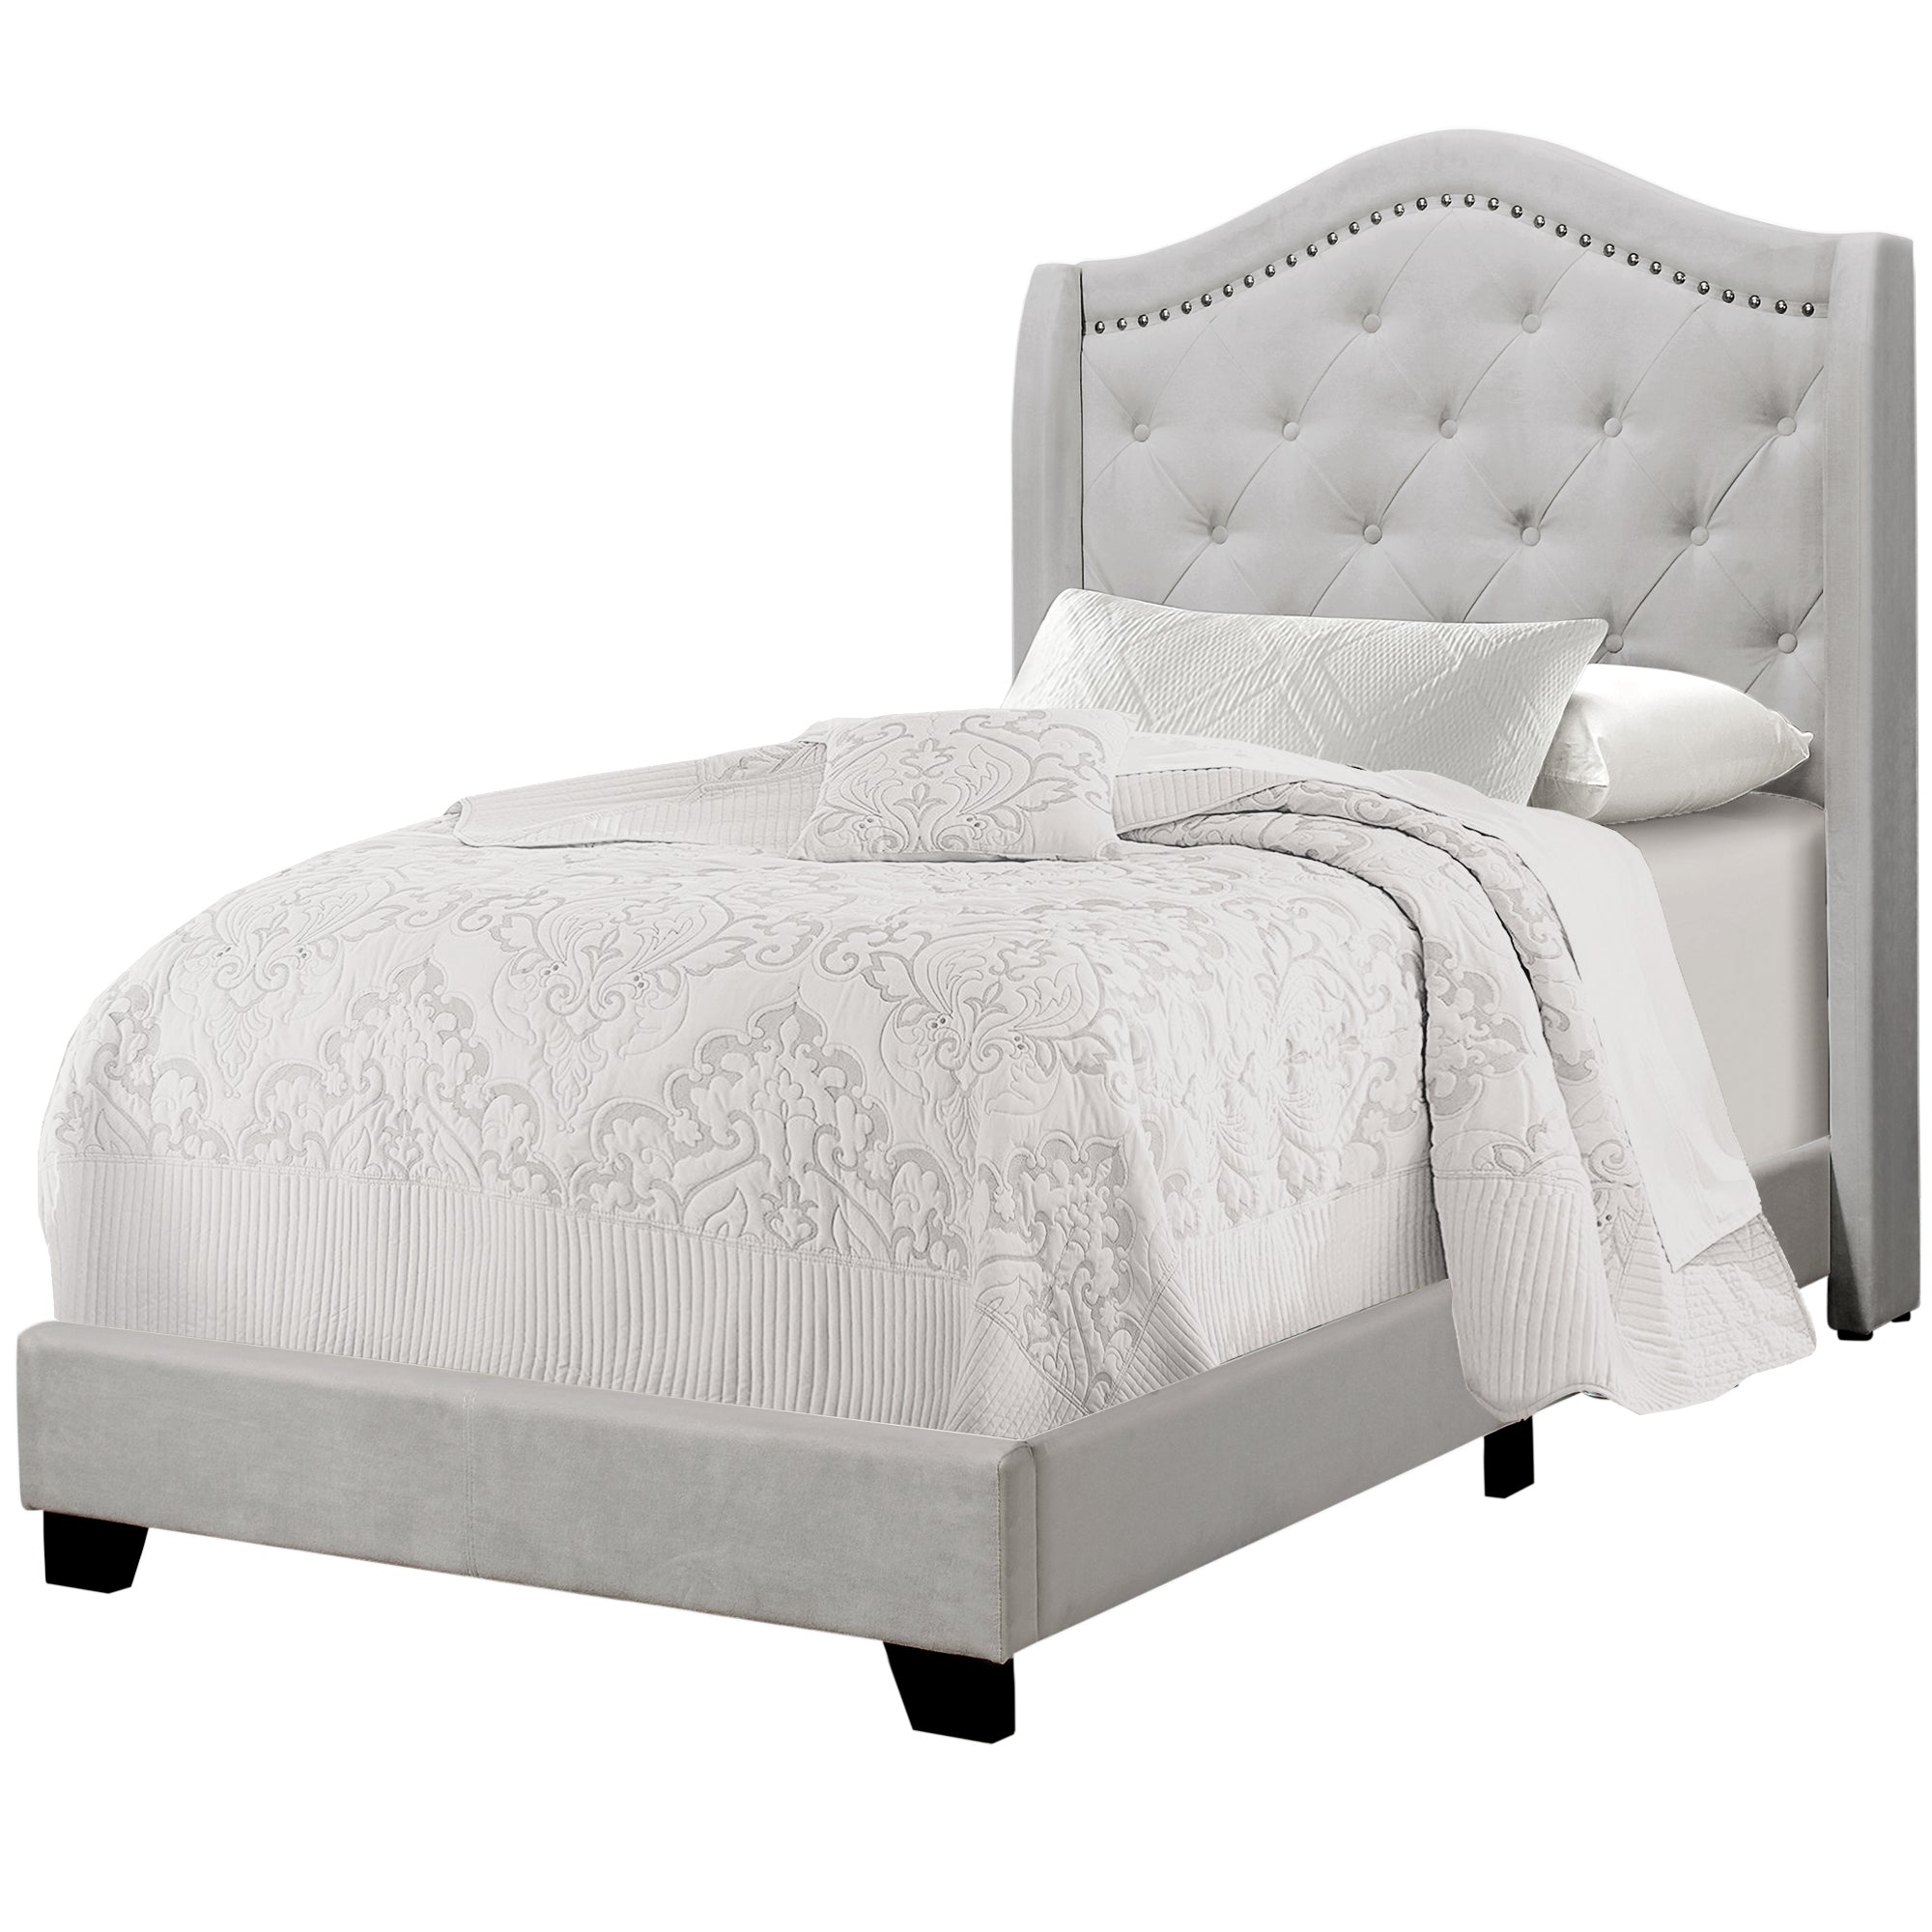 Bed - Twin Size / Light Grey Velvet With Chrome Trim